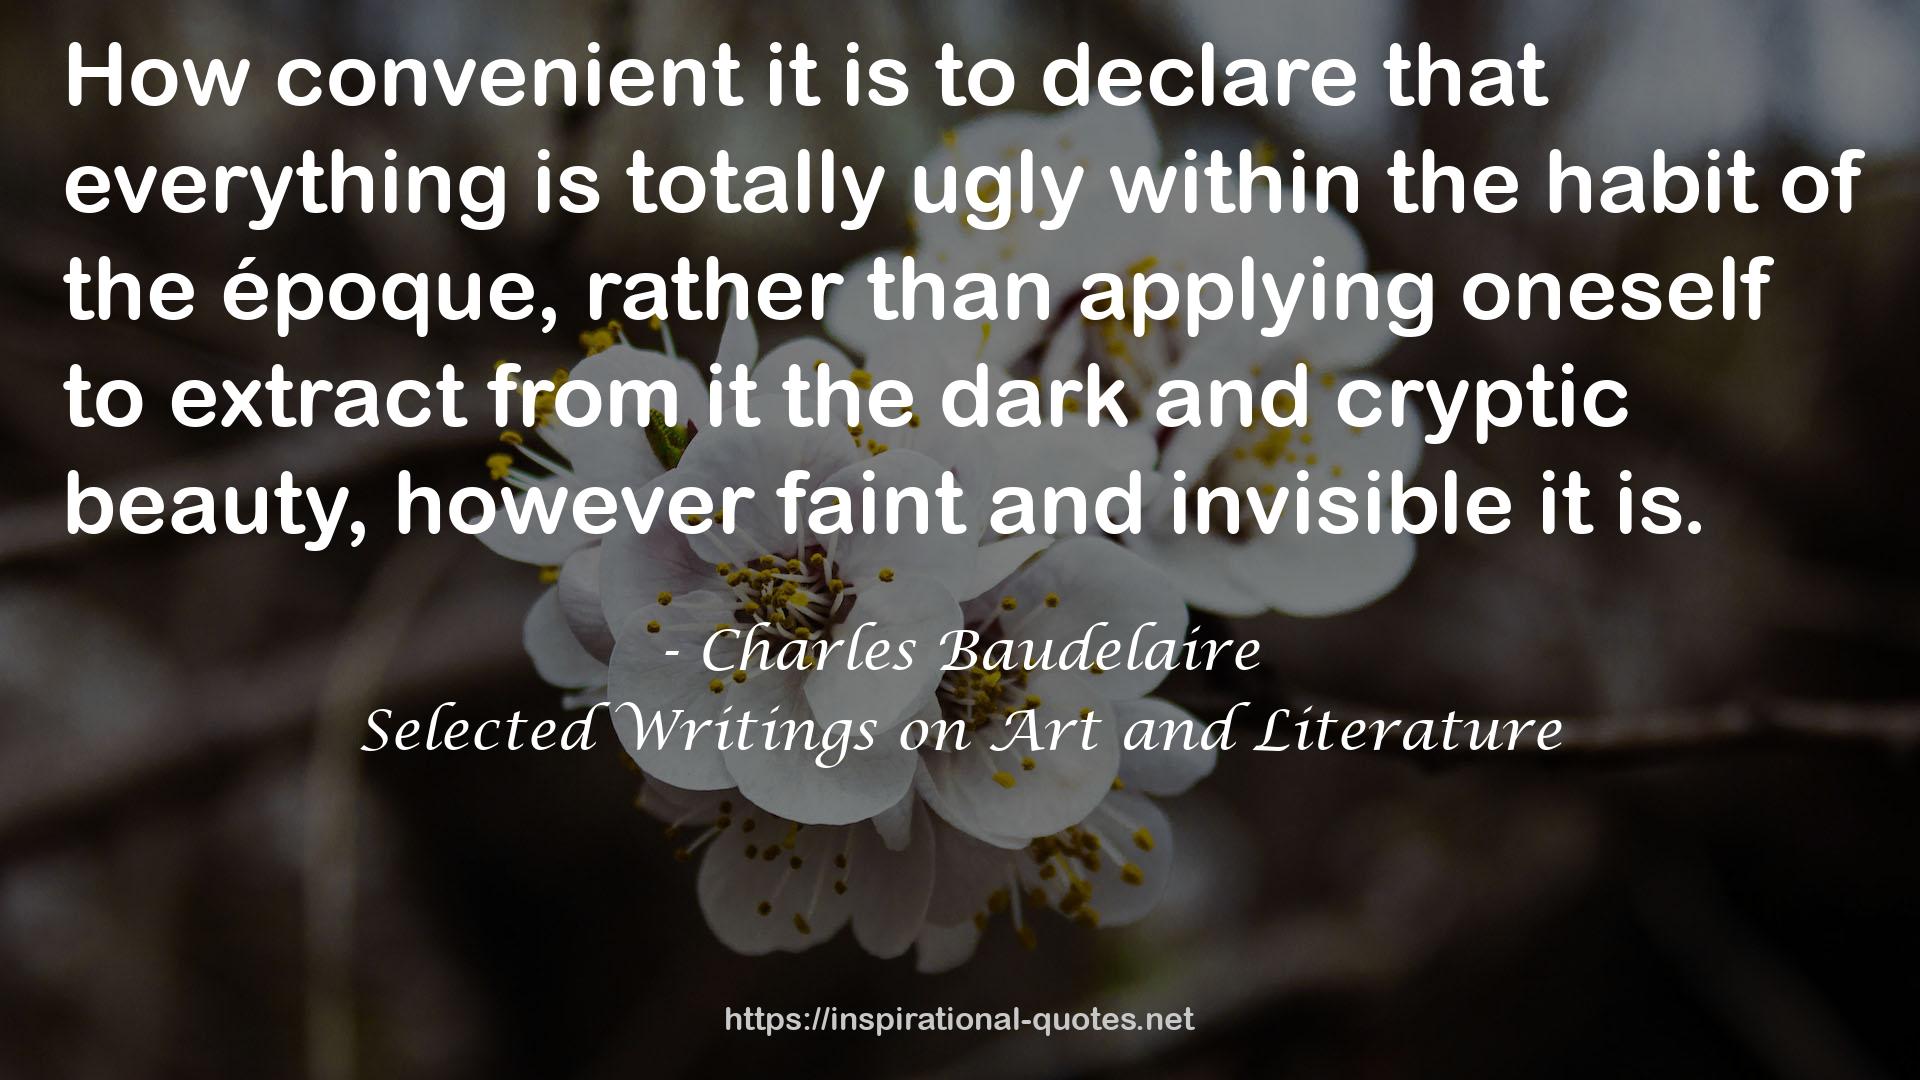 Selected Writings on Art and Literature QUOTES